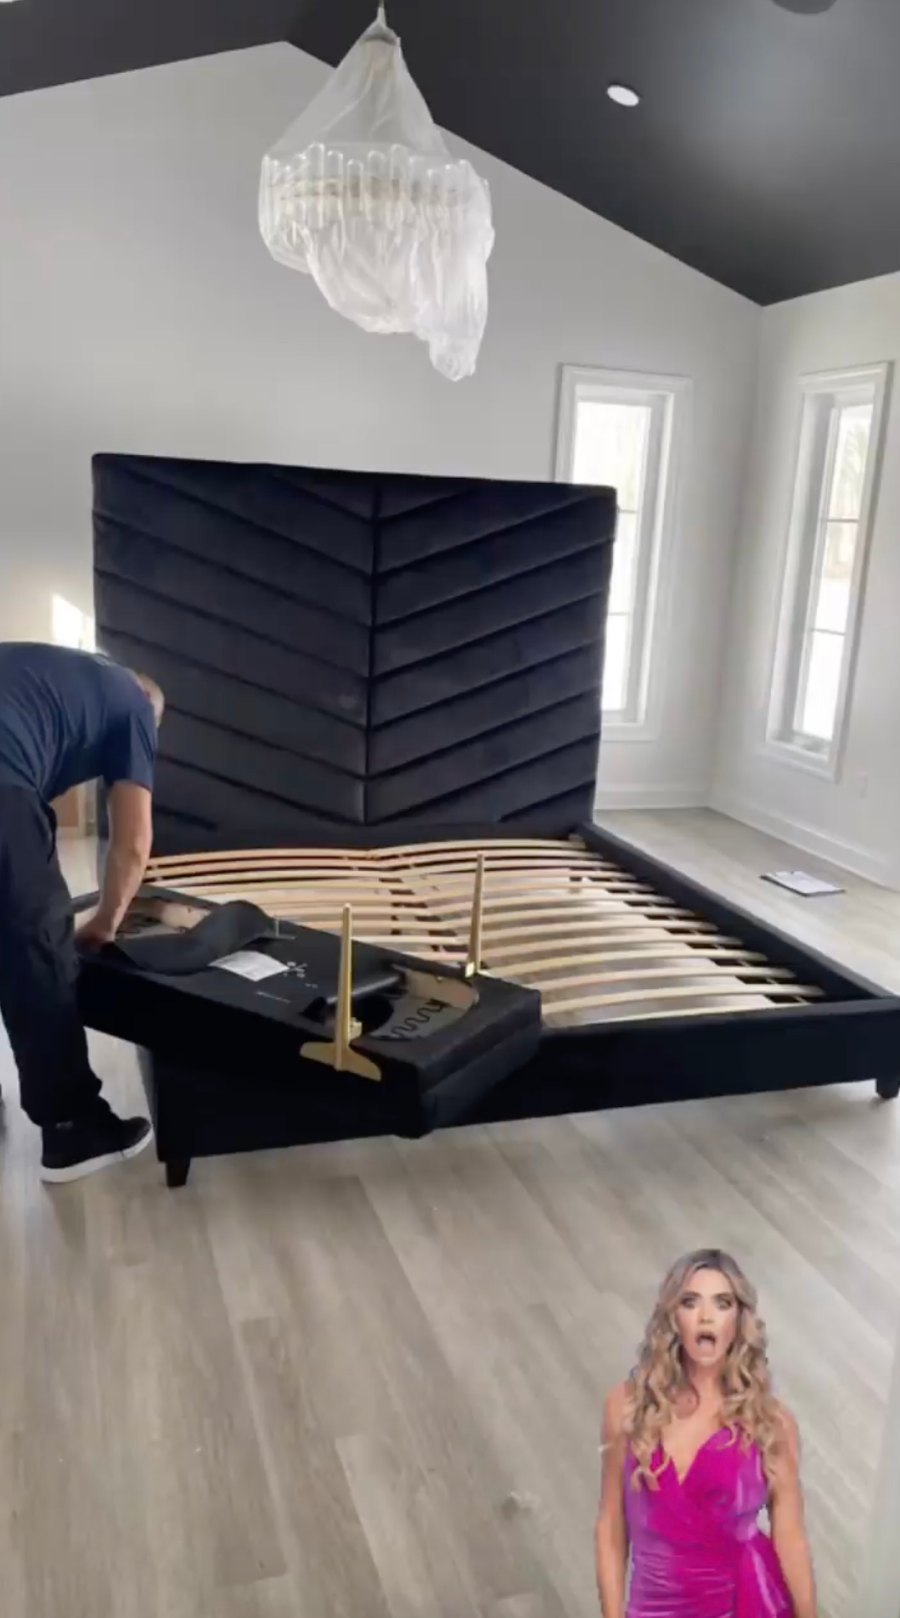 Kailyn Lowry’s Bed Arrives at New Home: I ‘Hope’ to Have ‘Good Sex’ Here